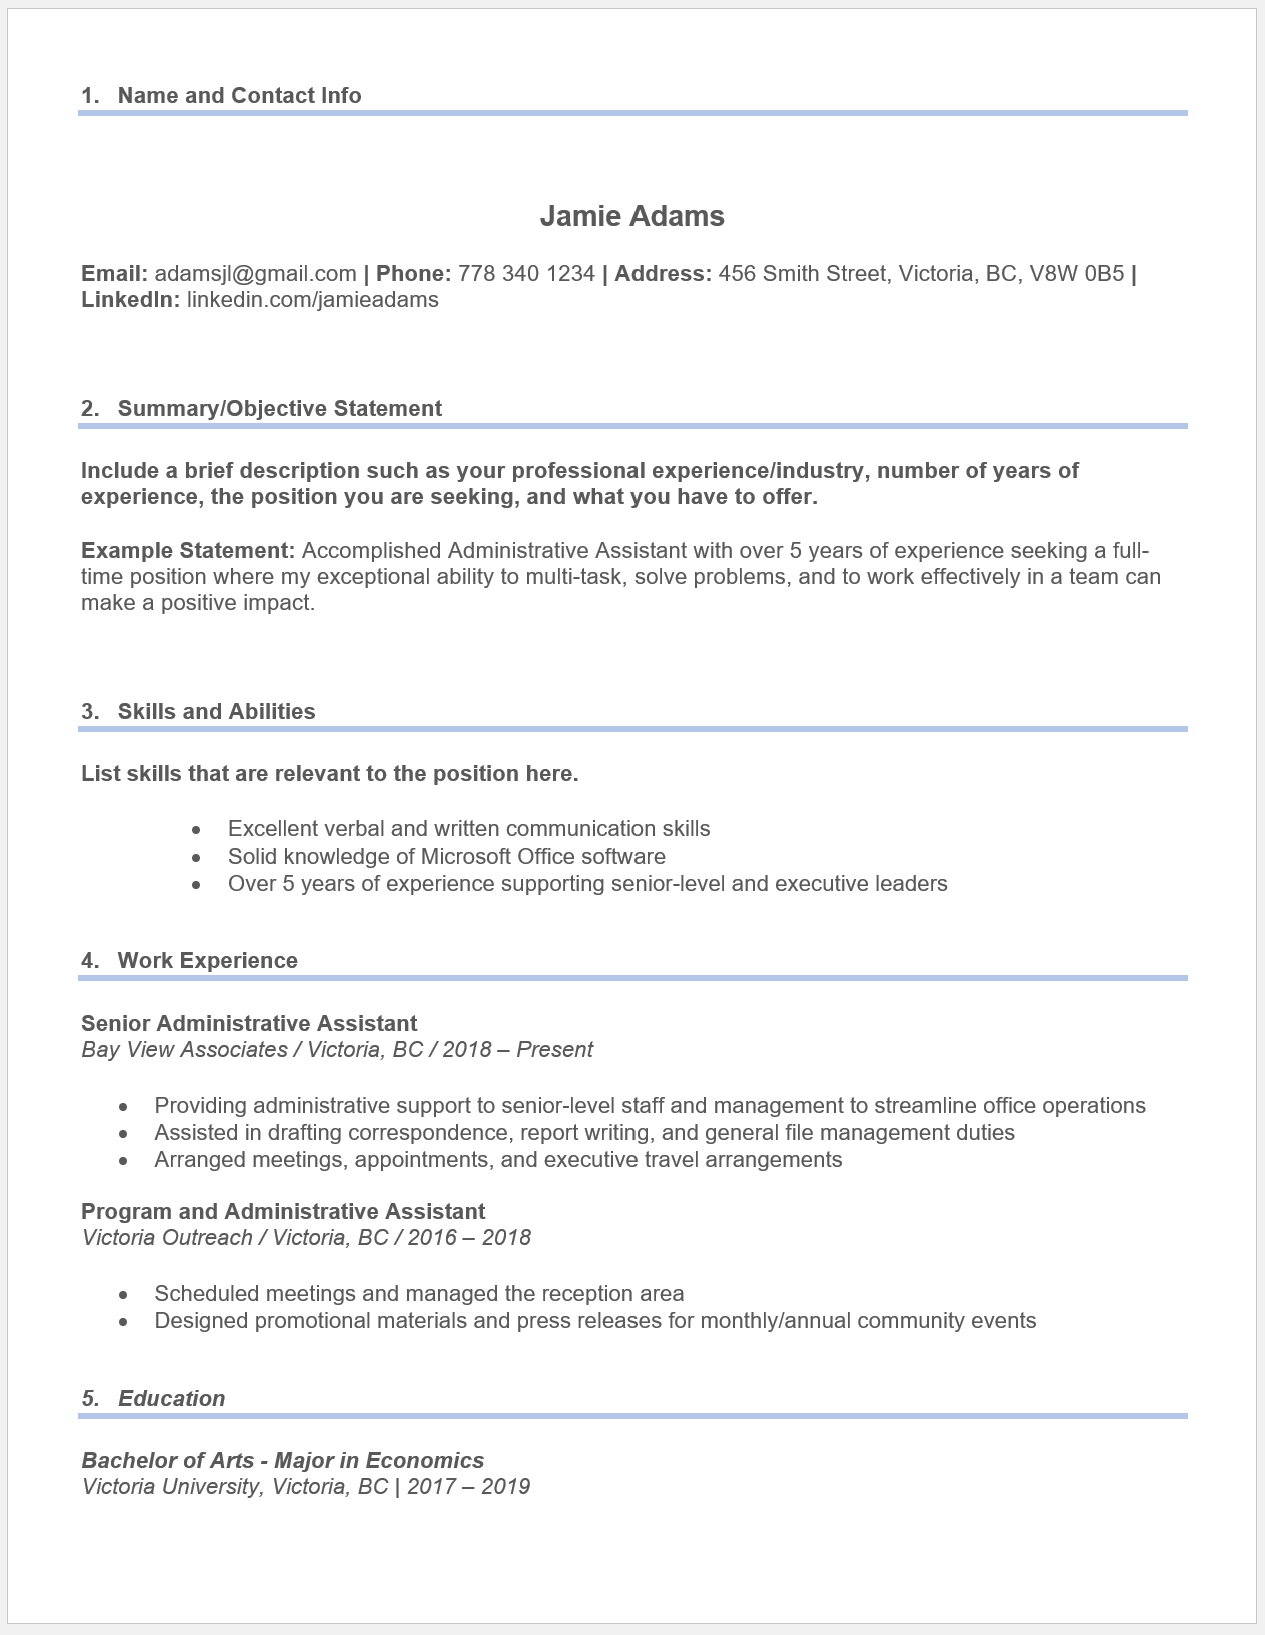 Example chronological resume for an administrative assistant position. 